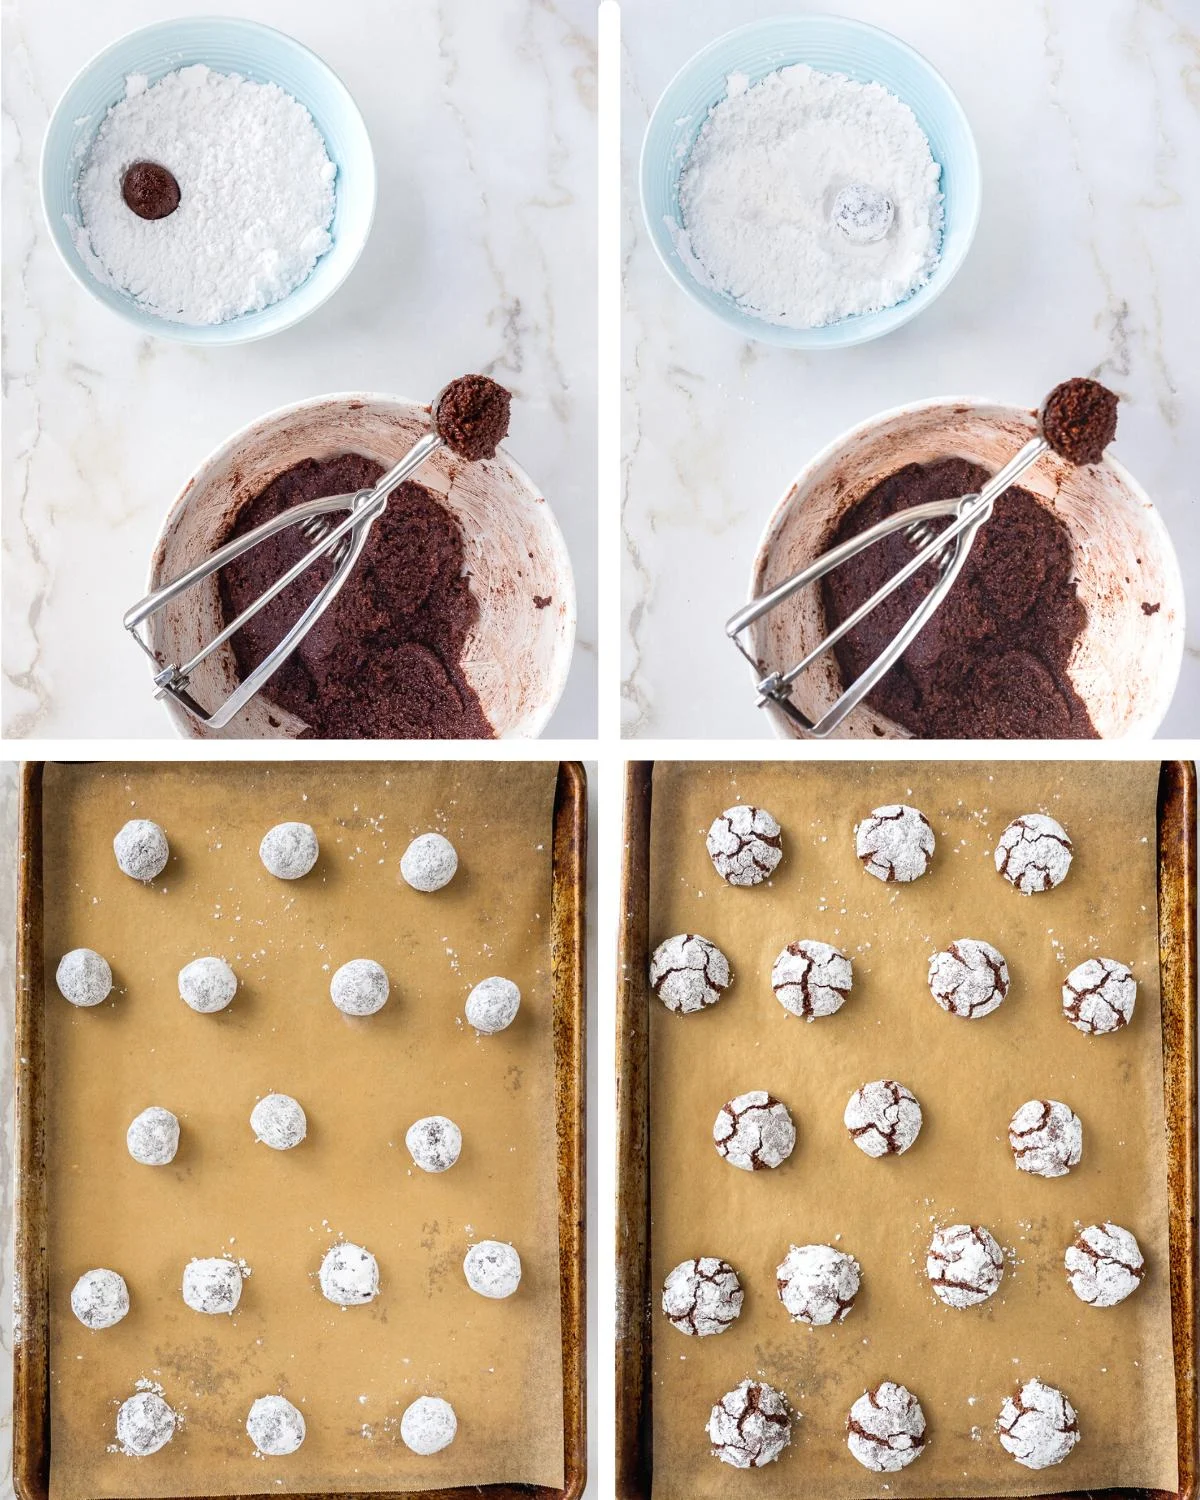 Step by step images of how to make chocolate amaretti cookies.